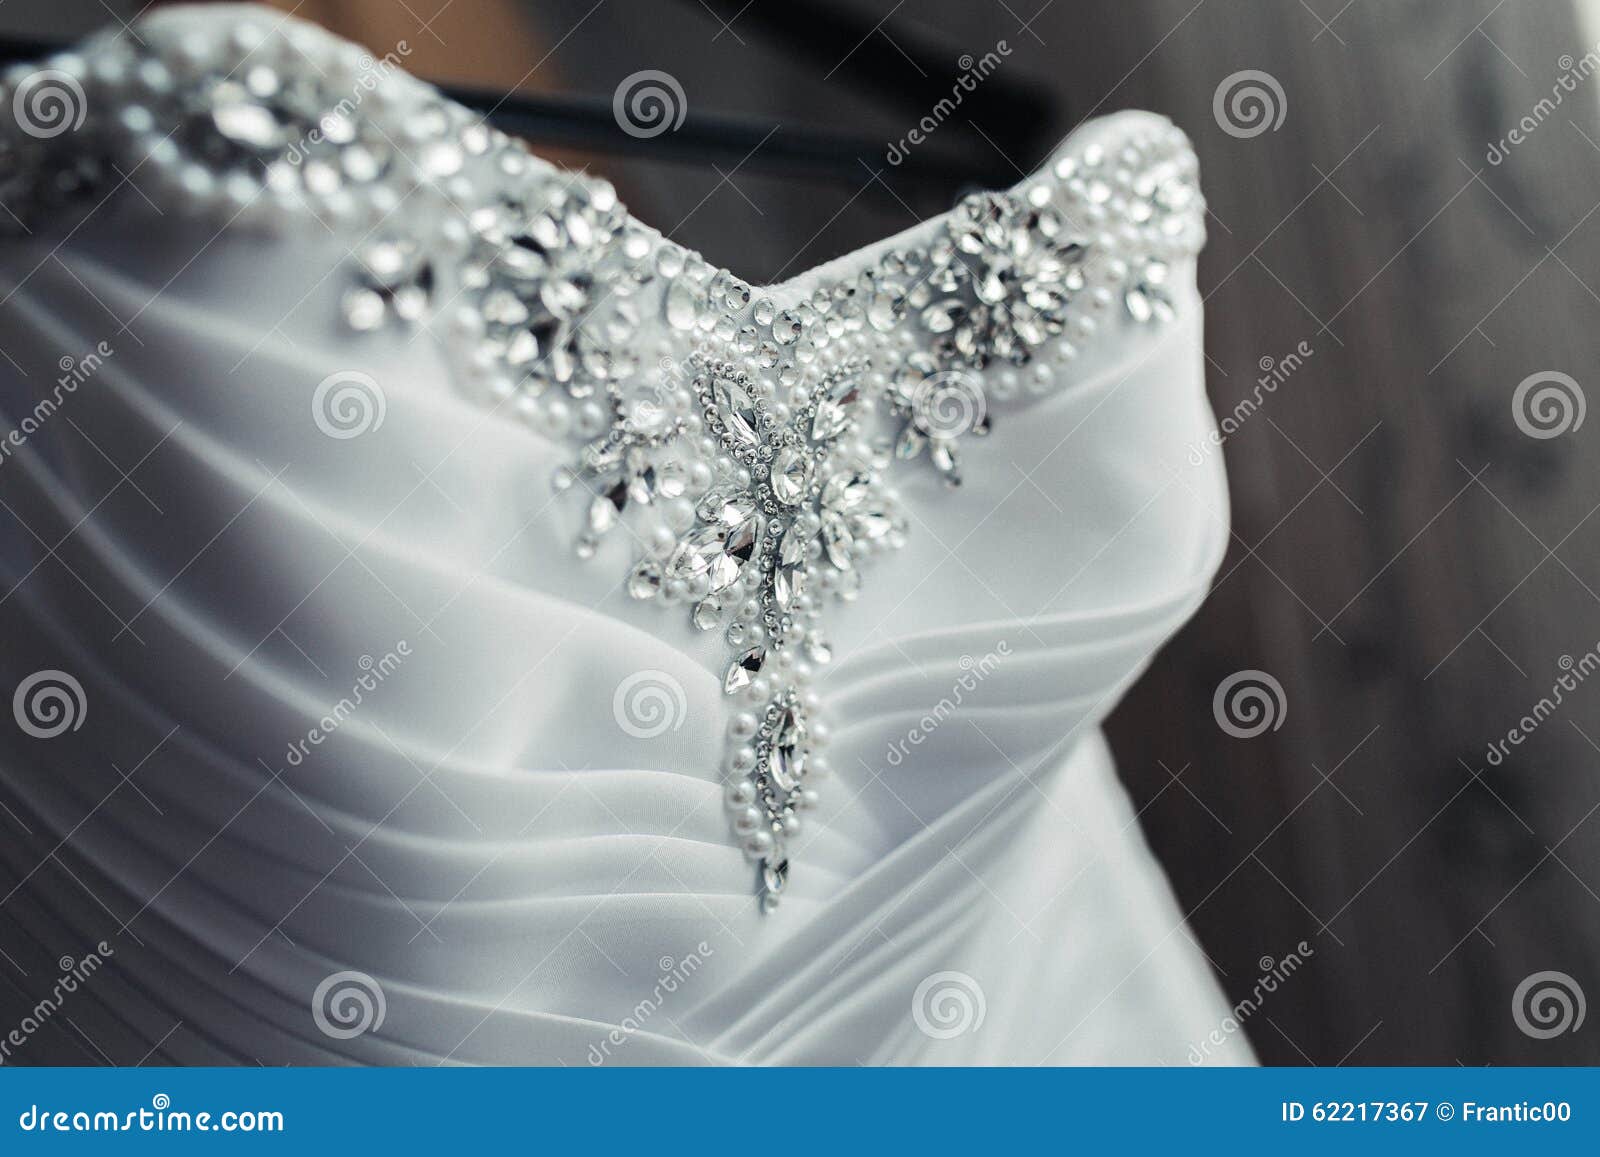 Wedding dress with pearls stock image. Image of accessories - 62217367